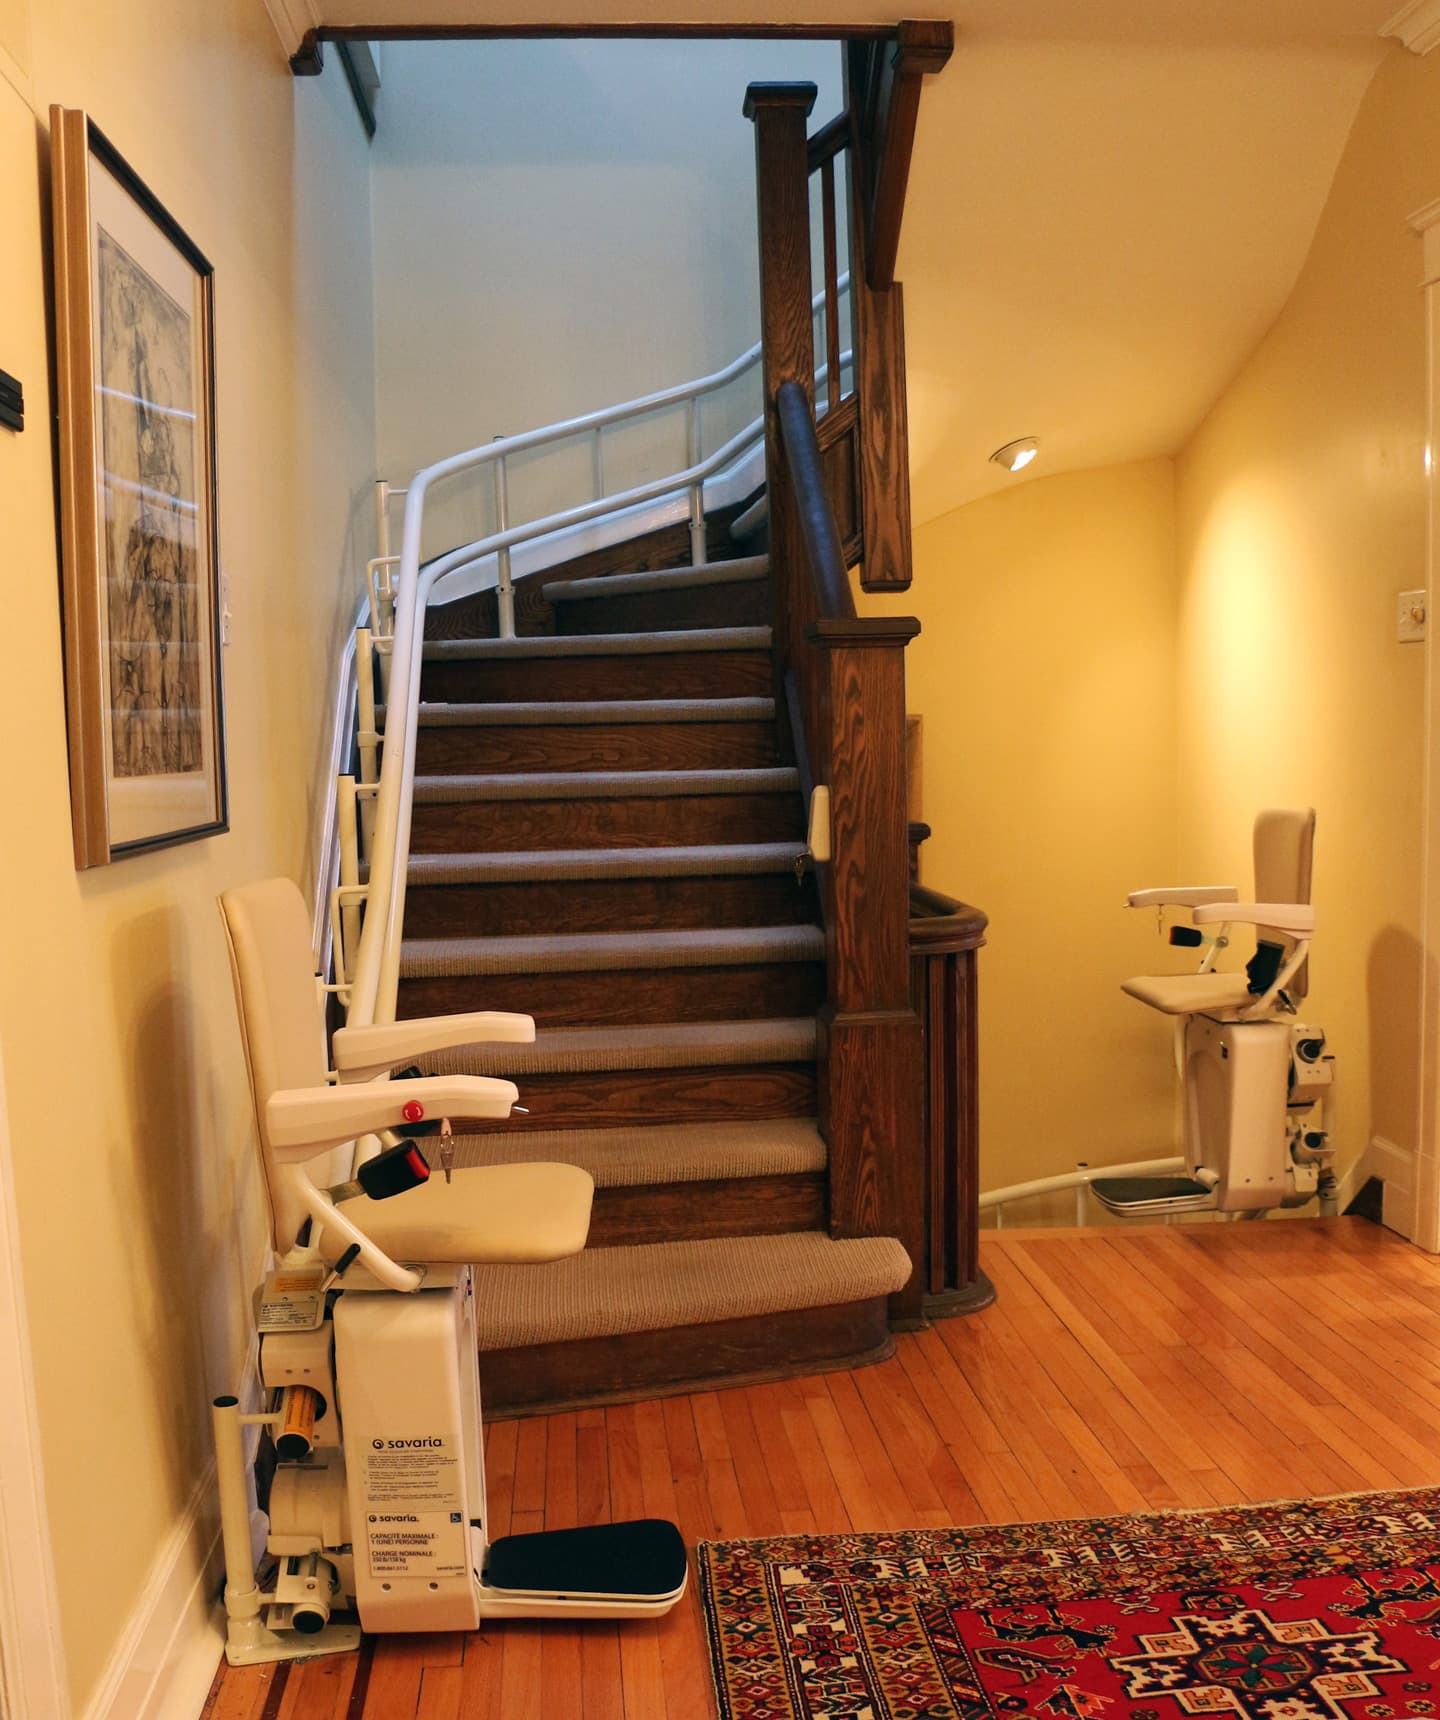 Used Stair Lifts For Sale Ontario